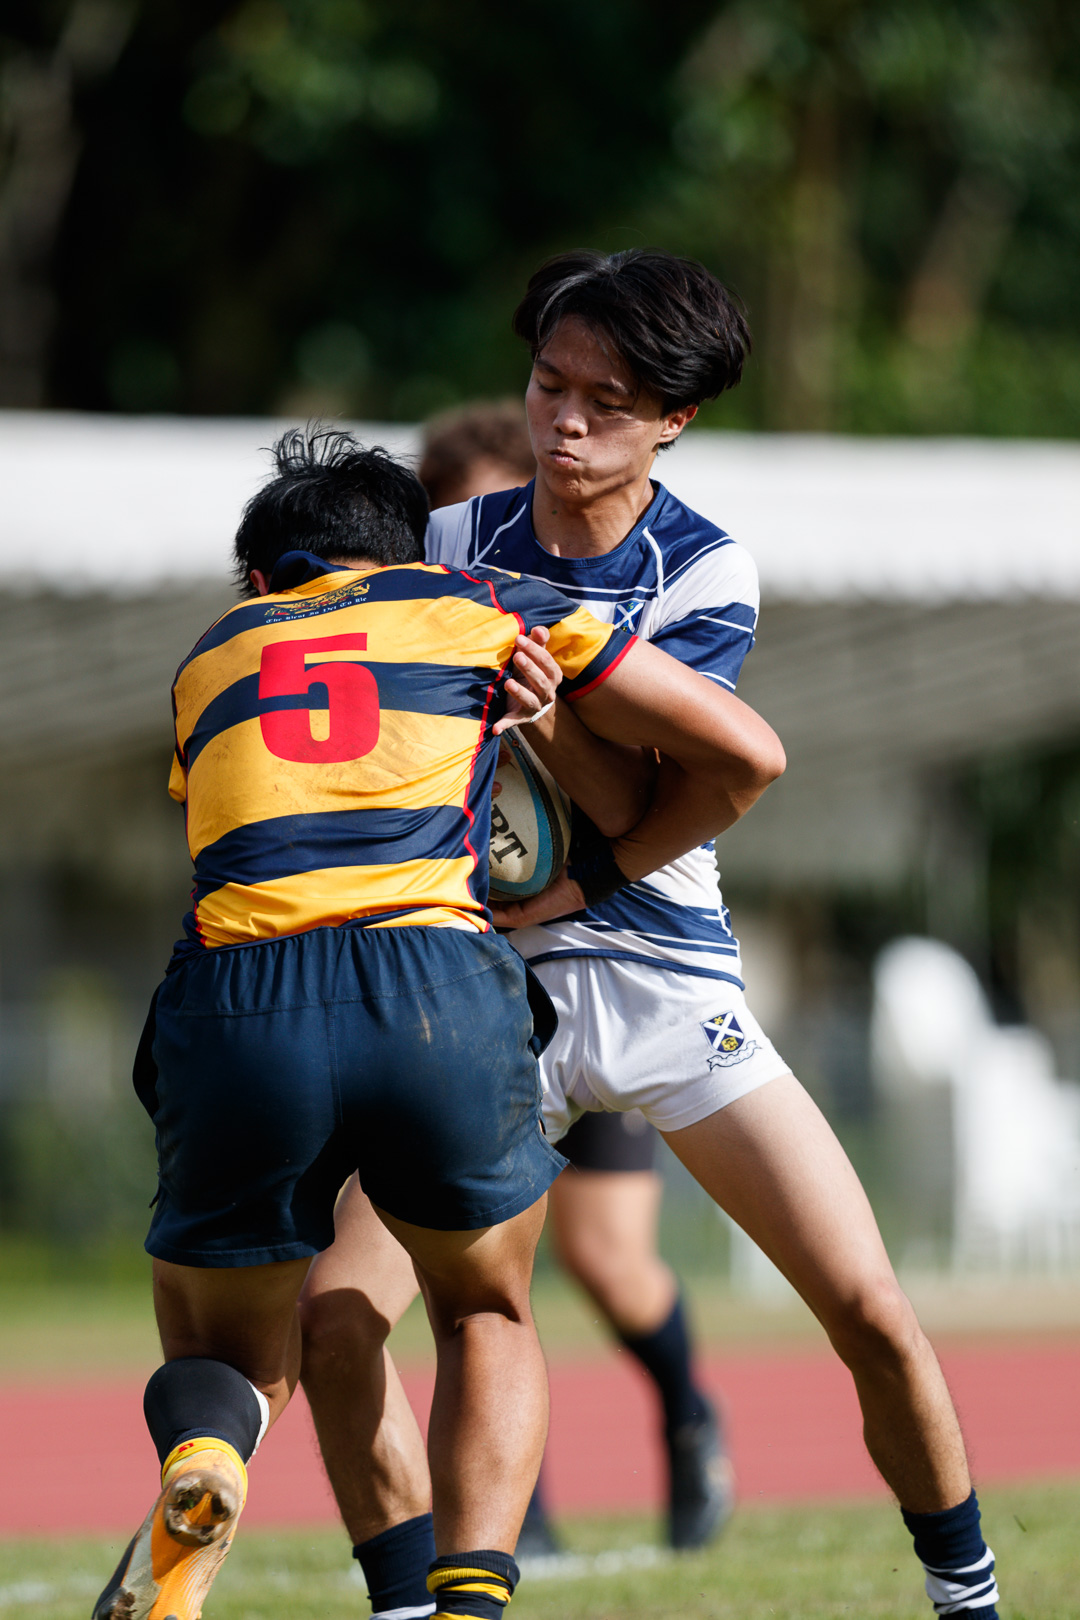 Jacob Tan (AC #5) collides with an opponent. (Photo 10 © Jared Chow/Red Sports)